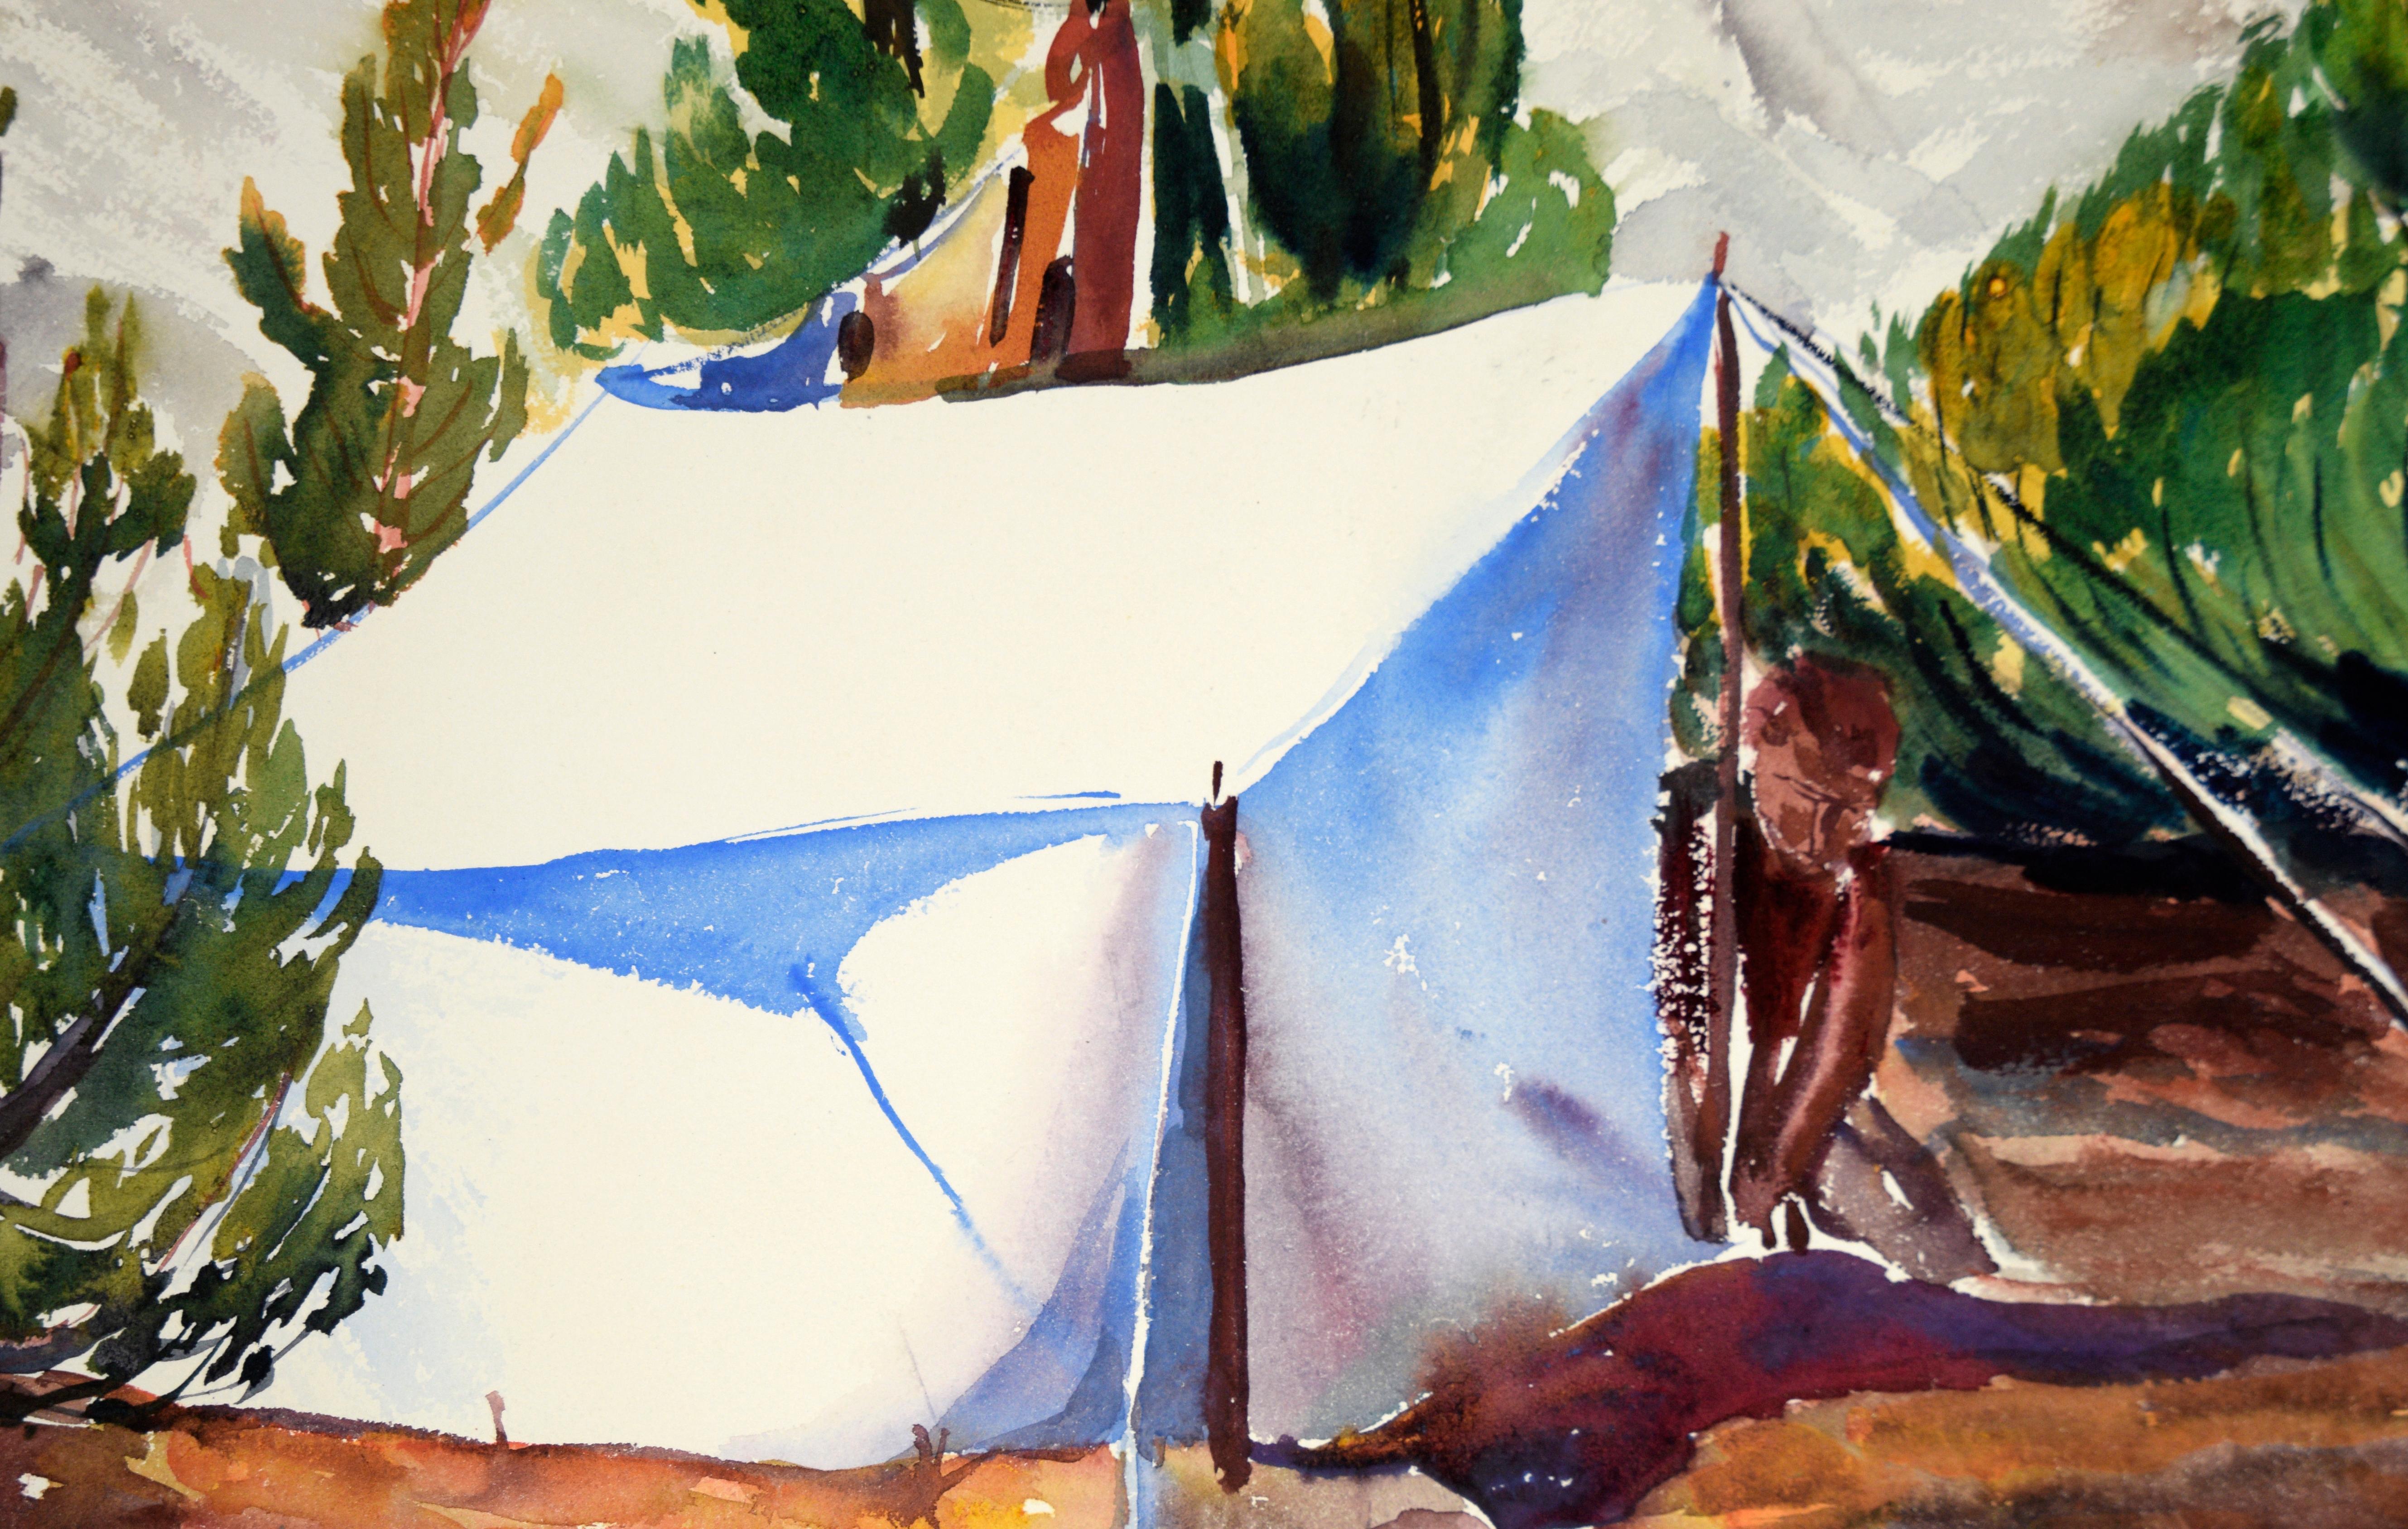 Staking a Tent, Modernist Landscape in Watercolor on Paper

A vibrant watercolor landscape with a person staking a tent amongst low coniferous trees with distant snow-capped mountains in the background, by California artist, Lucile Marie Johnston